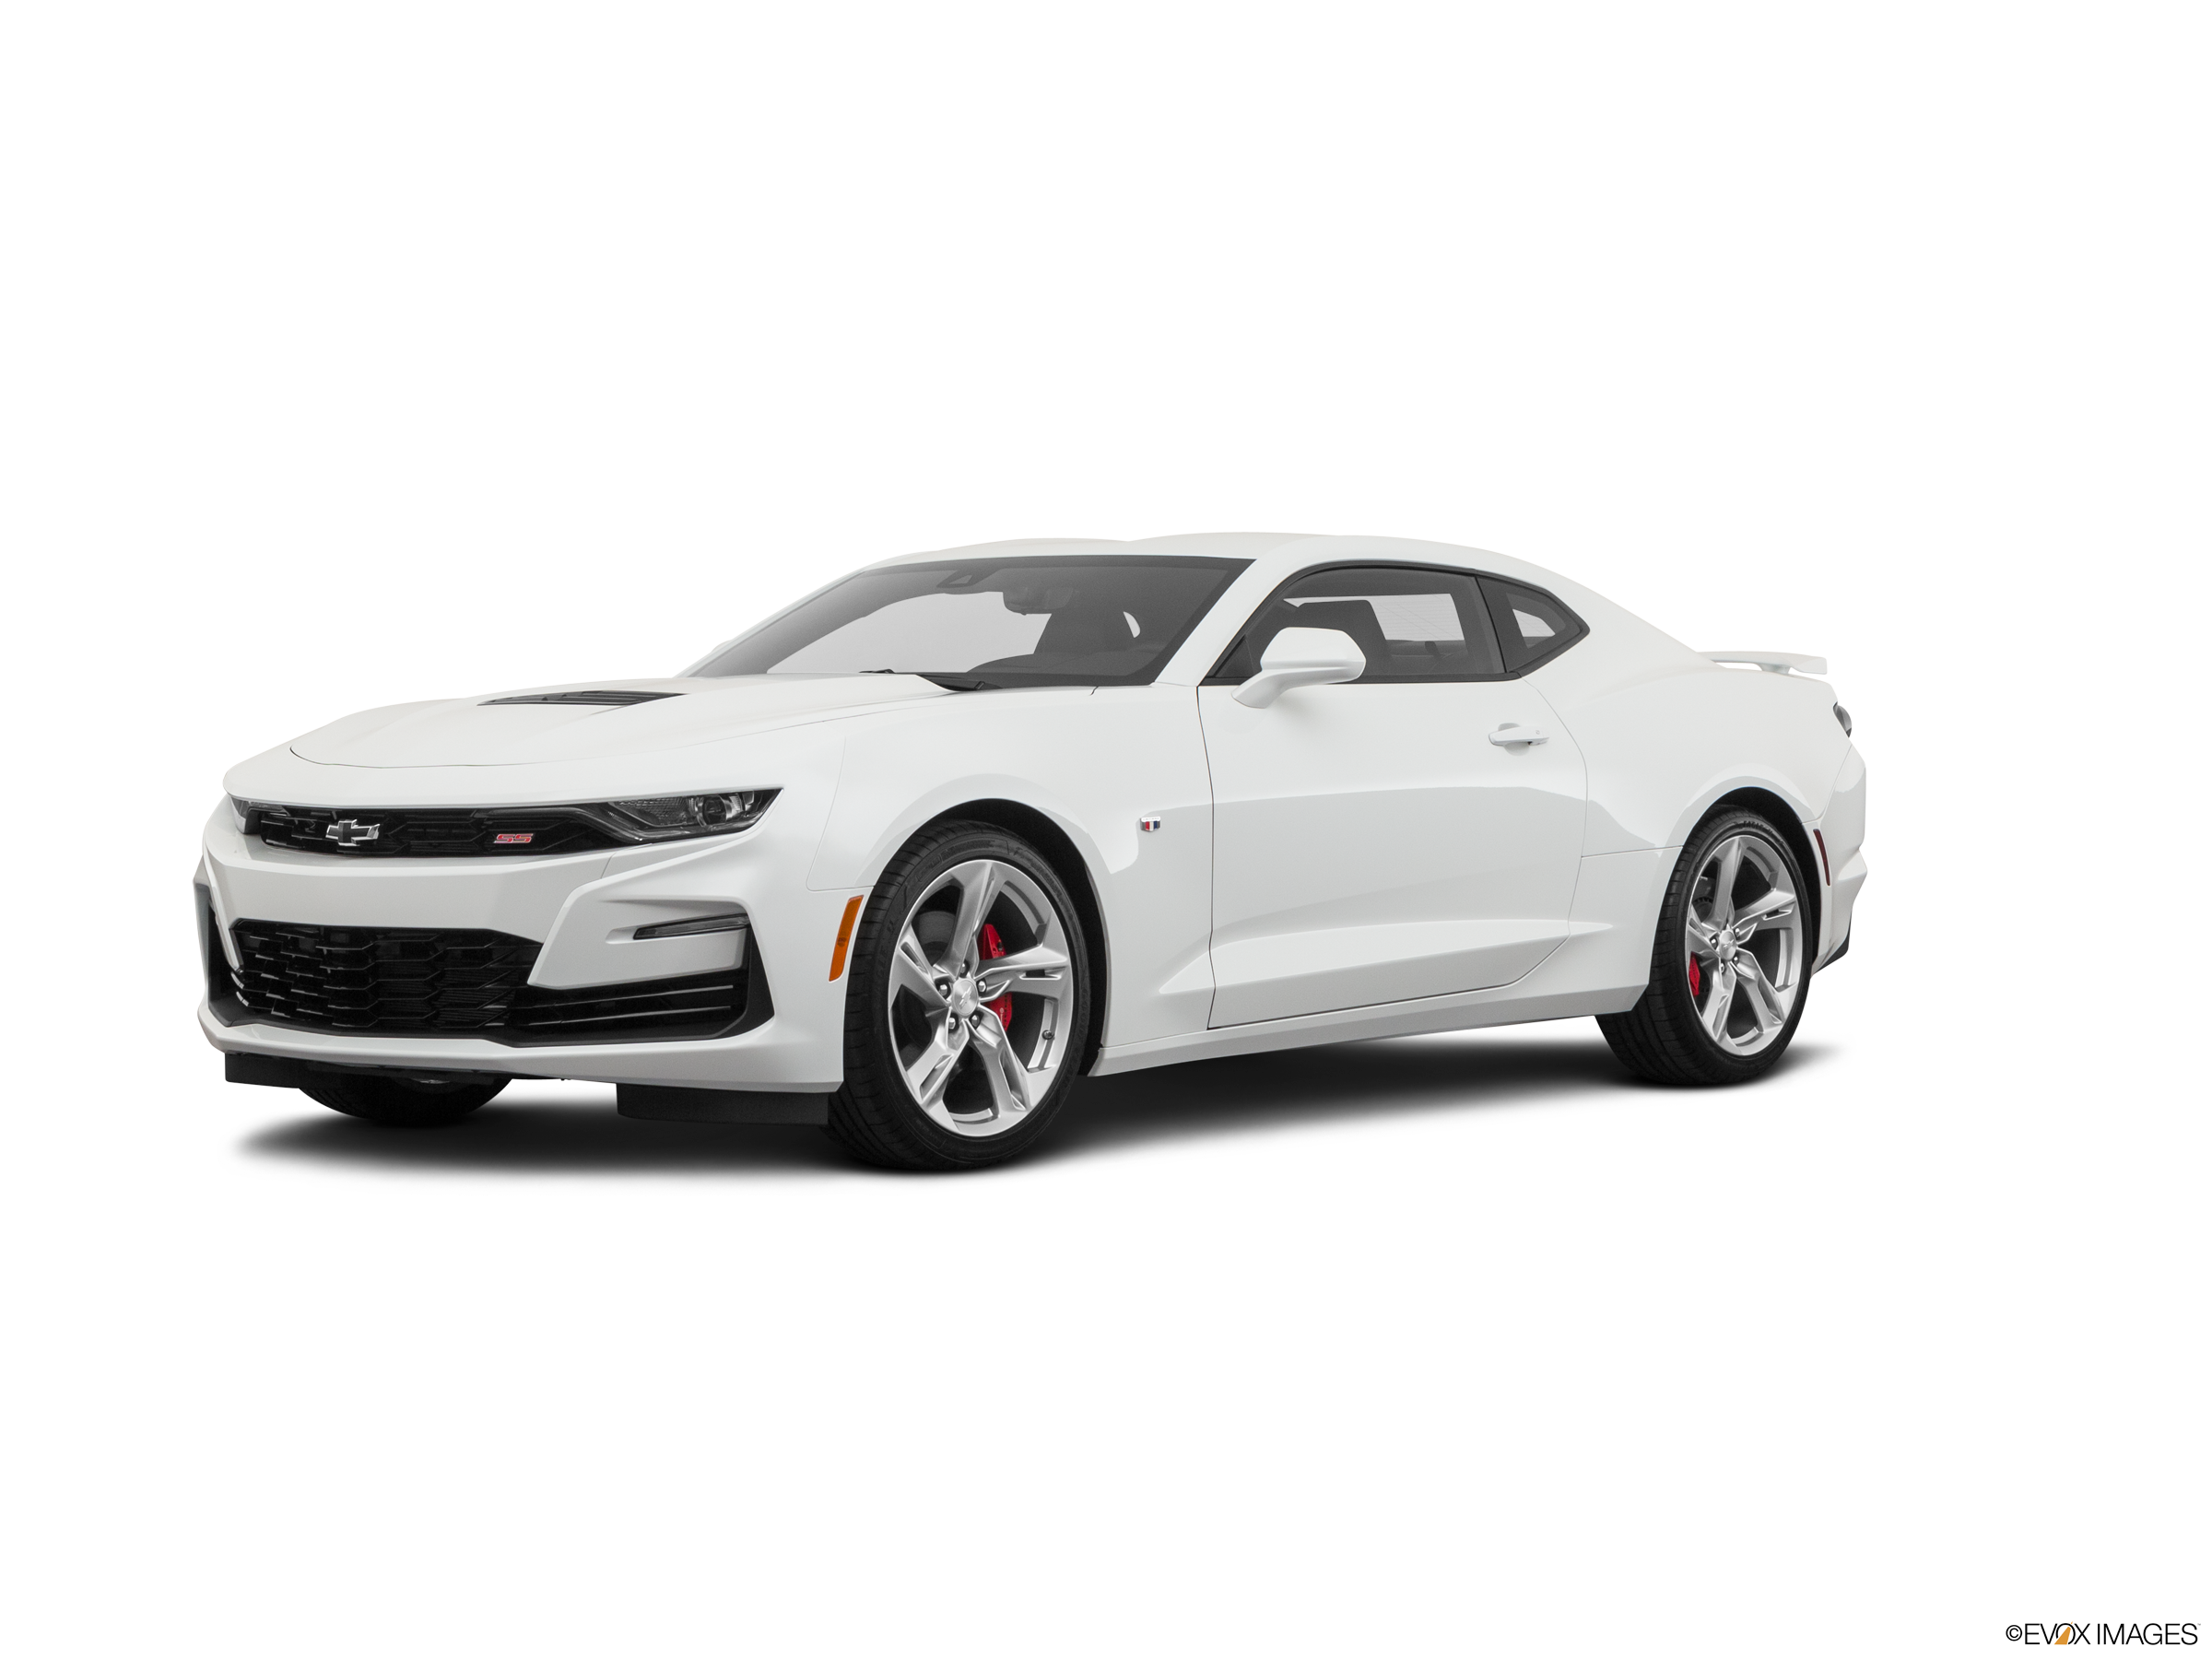 New 2022 Chevy Camaro SS Prices | Kelley Blue Book